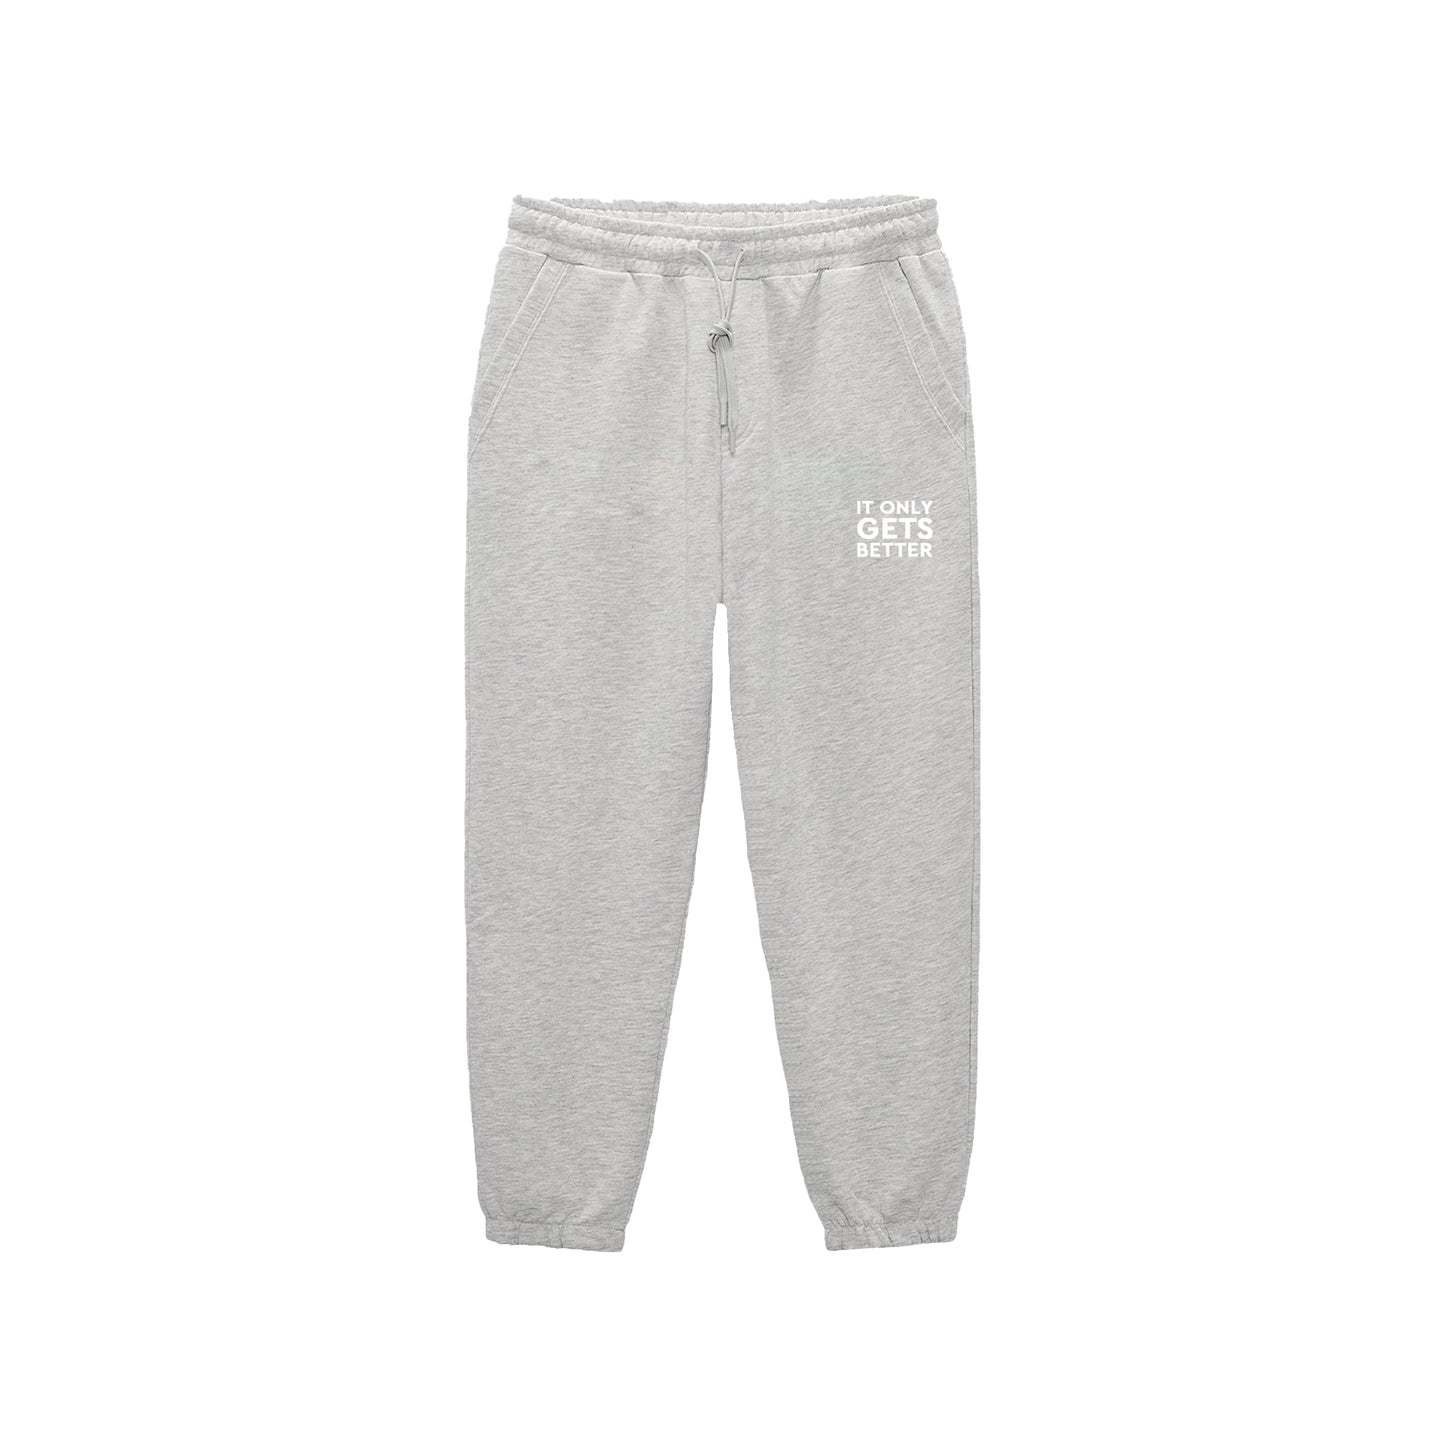 'It Only Gets Better' Joggers